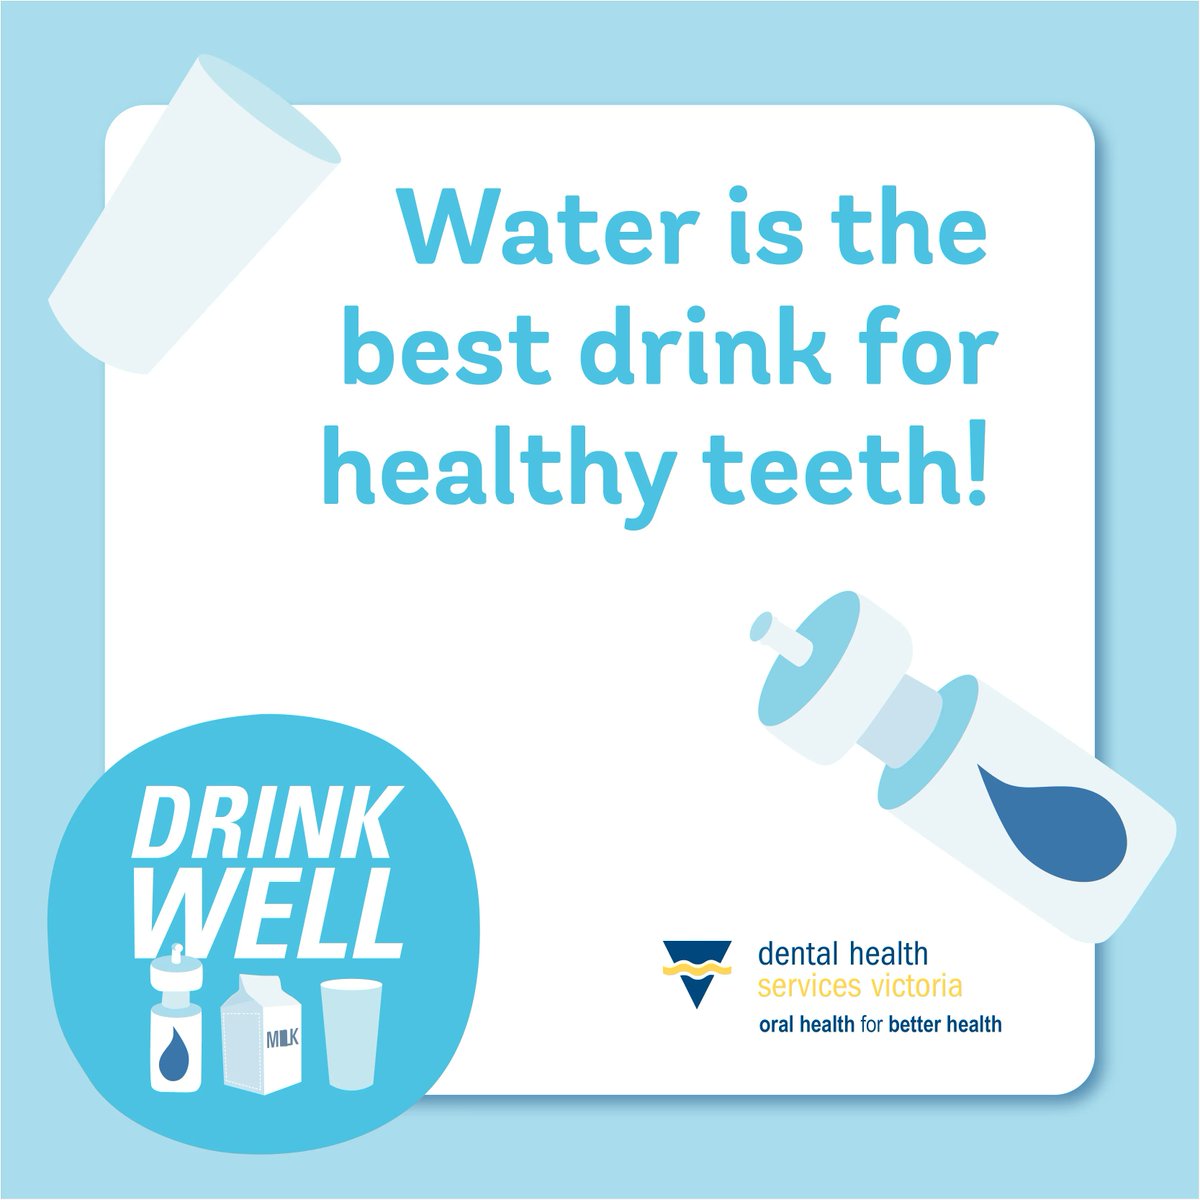 It's Dental Health Week! Water is the best drink for healthy teeth! Tap water across most of Victoria contains fluoride. Fluoride strengthens the outer protective layer of our teeth –against decay. For more information visit: bit.ly/3Q9RVpY @VicDental #dentalhealthweek